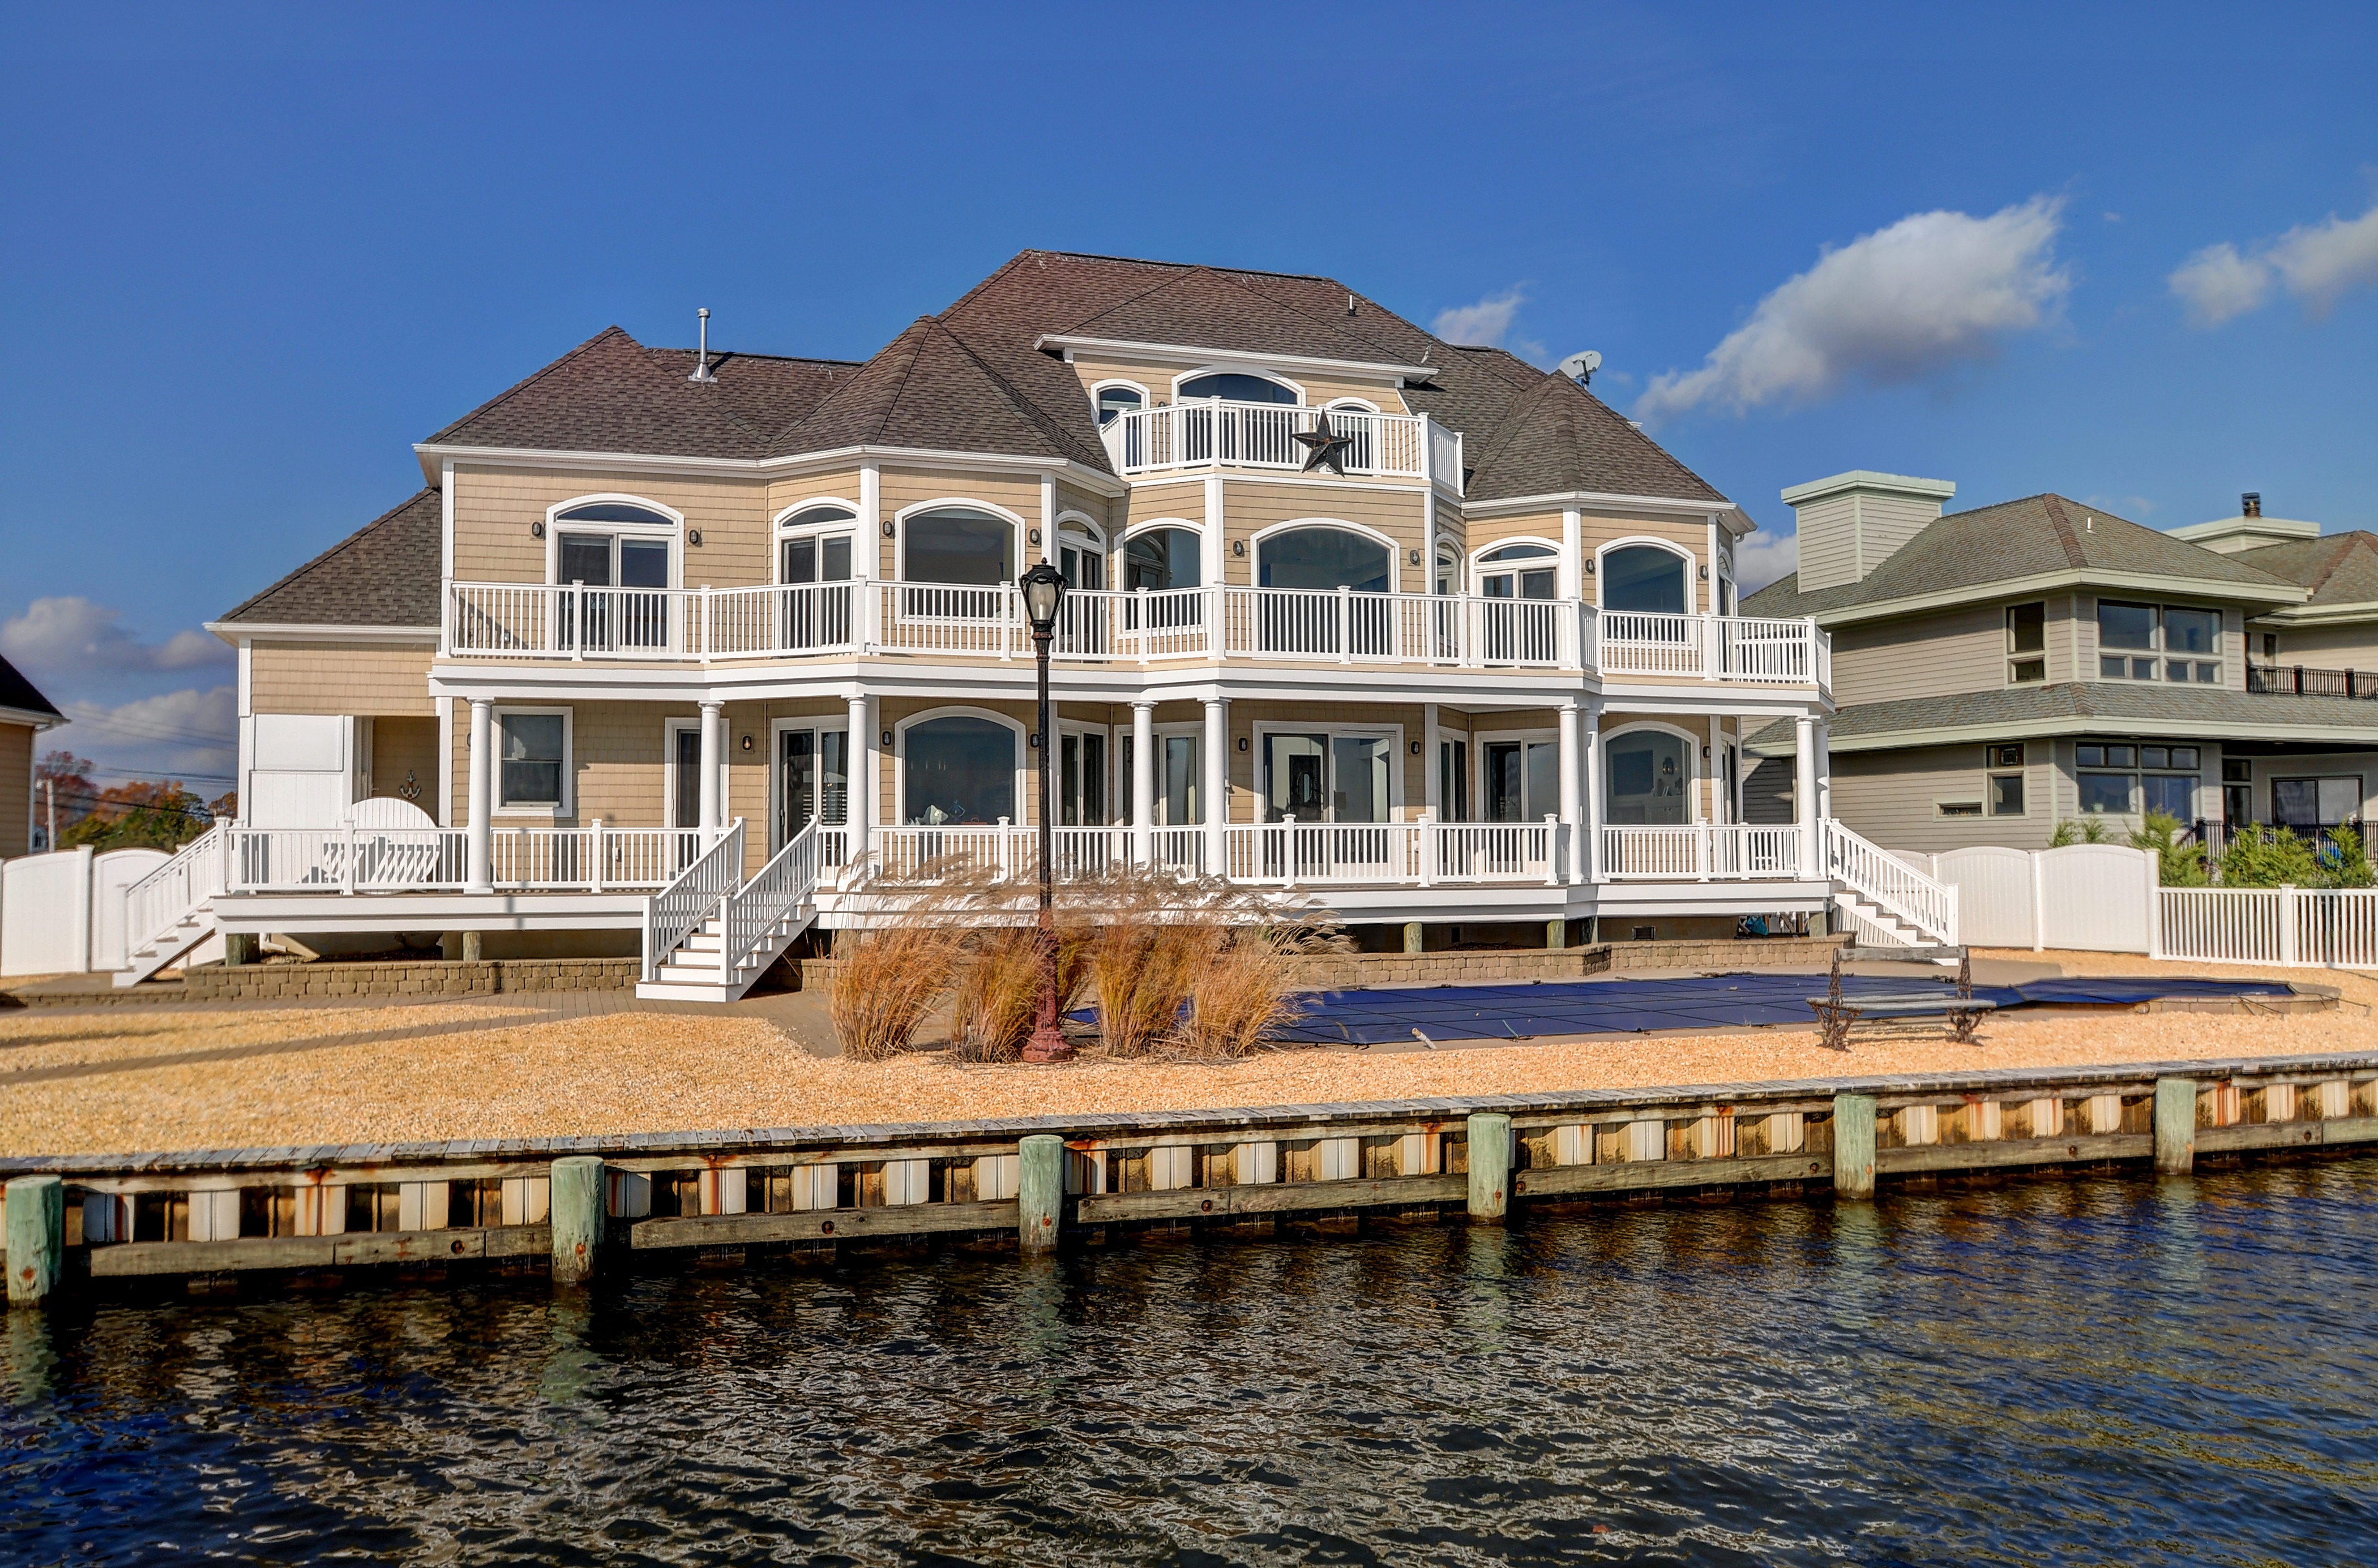 Photo: house/residence of the amusing 10 million earning Toms River, New Jersey-resident
